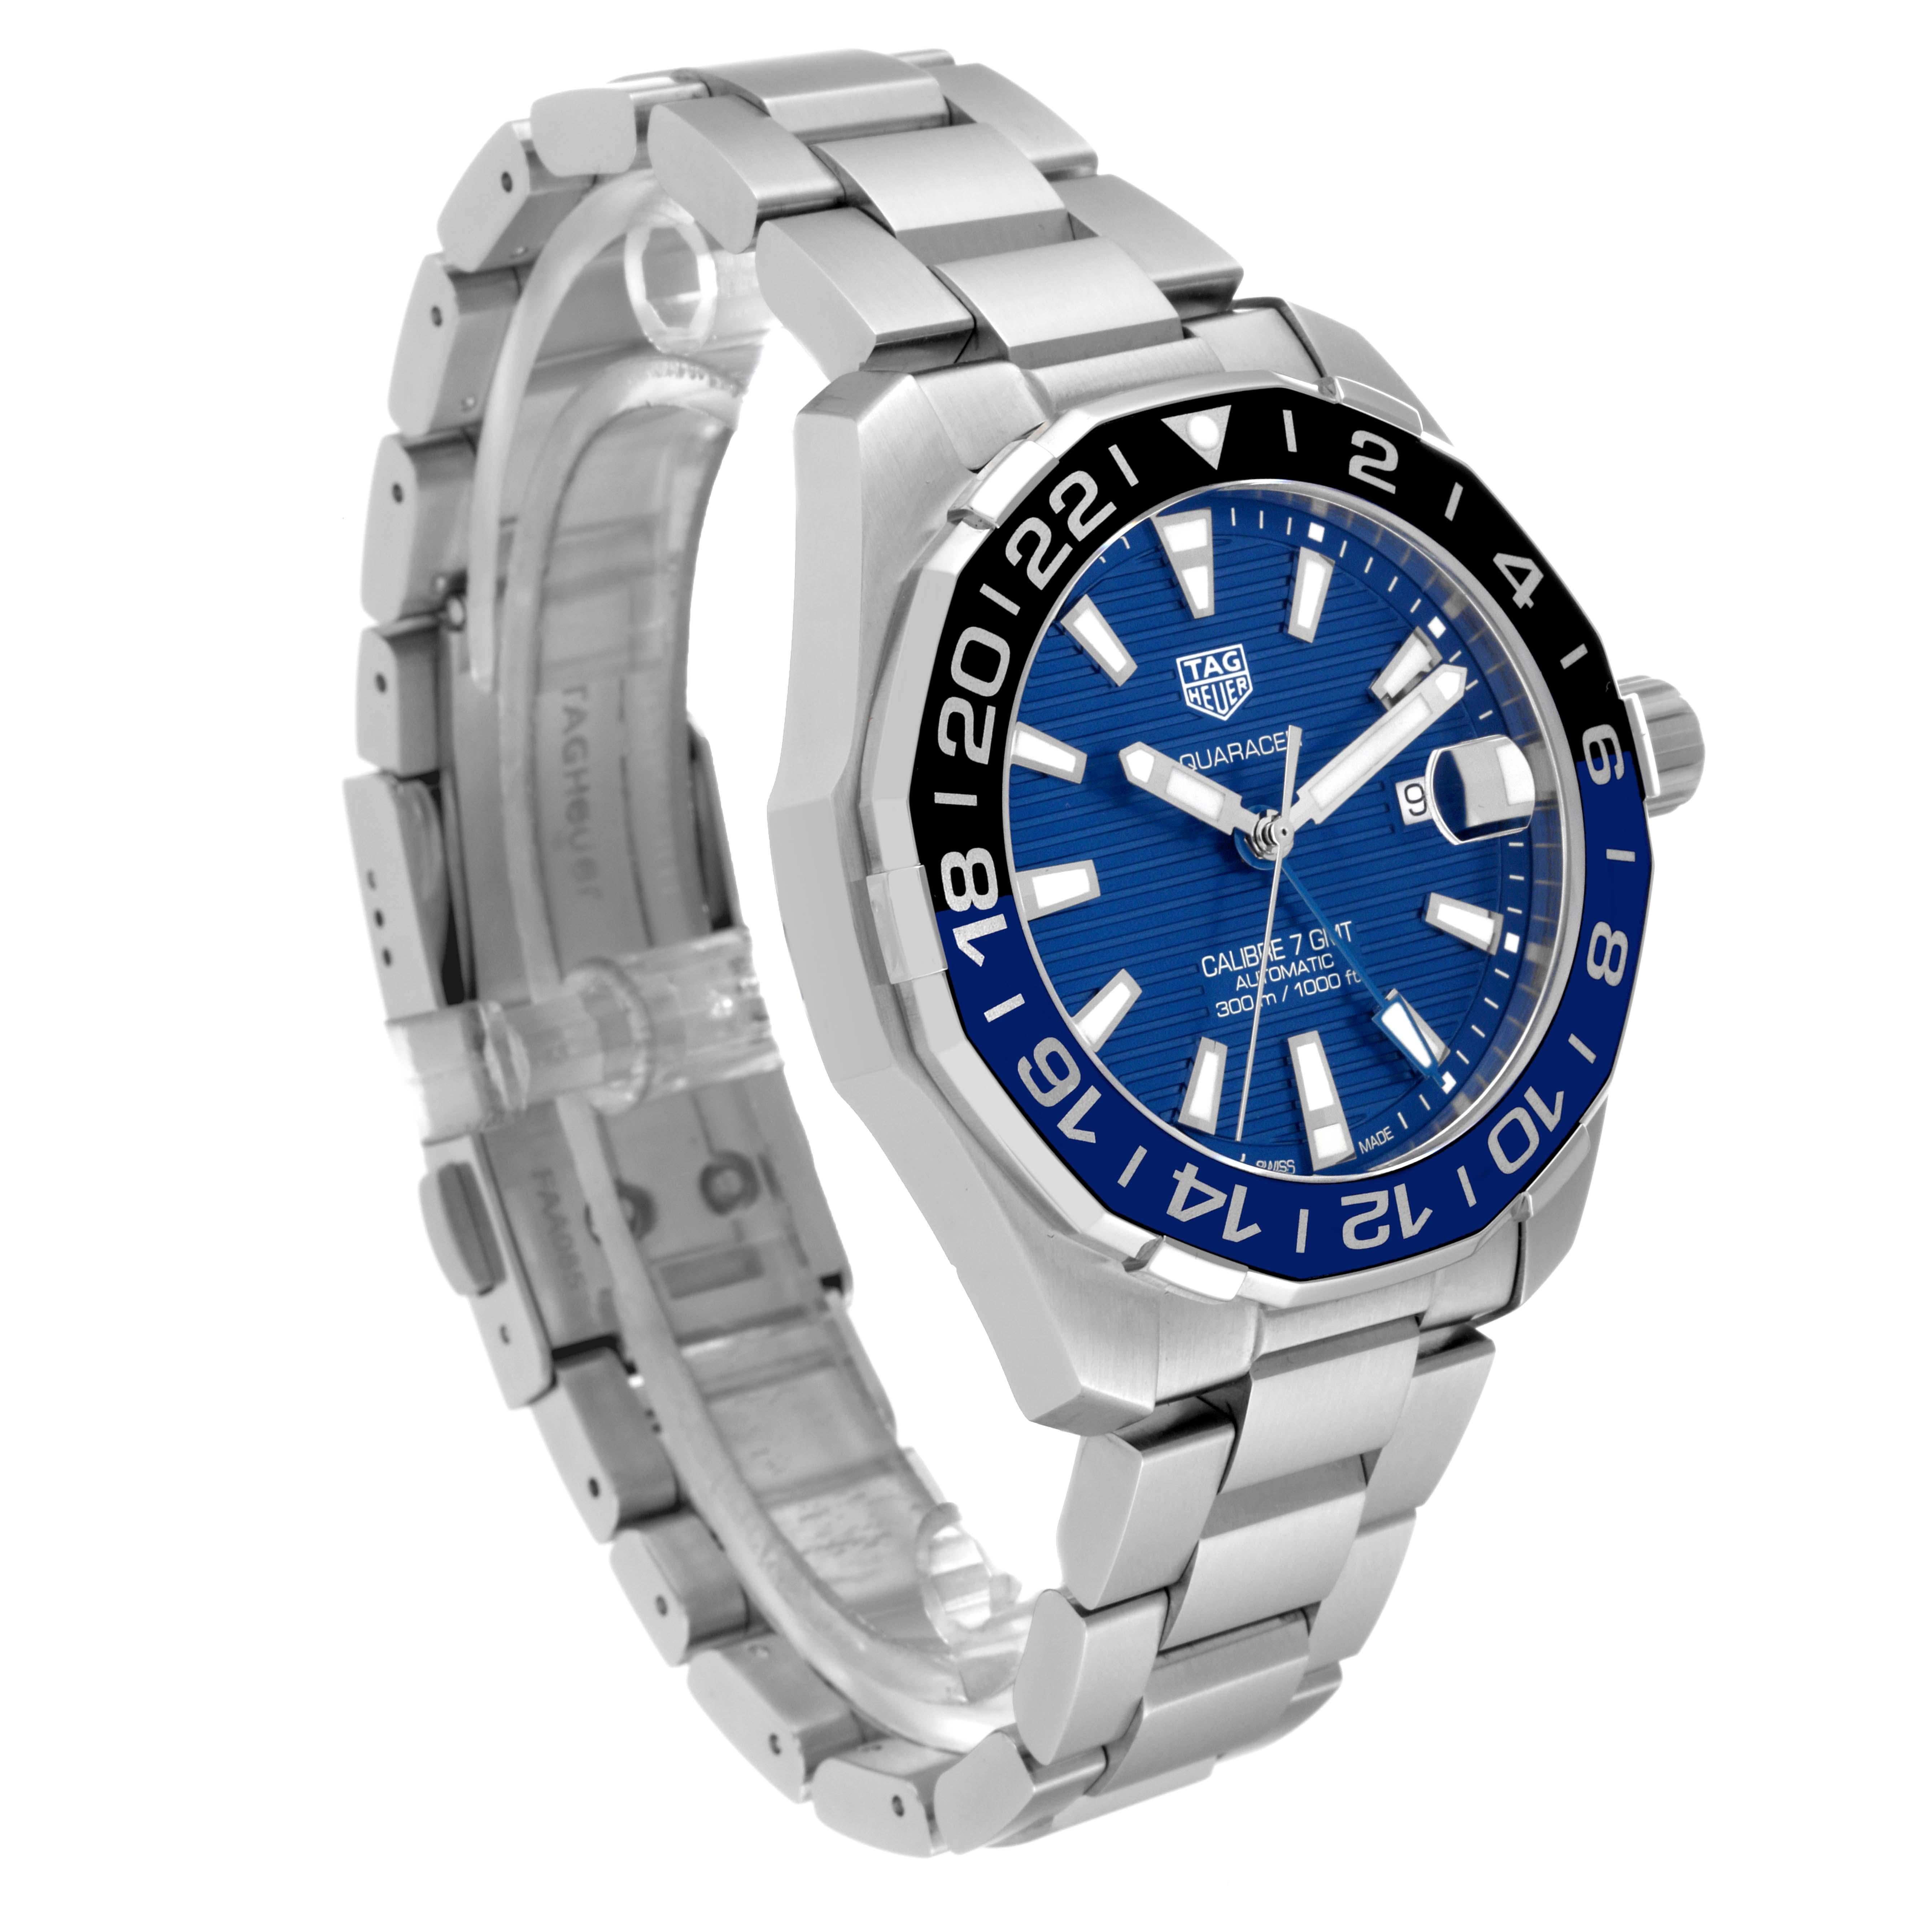 Tag Heuer Aquaracer Blue Dial Steel Mens Watch WAY201T In Excellent Condition For Sale In Atlanta, GA